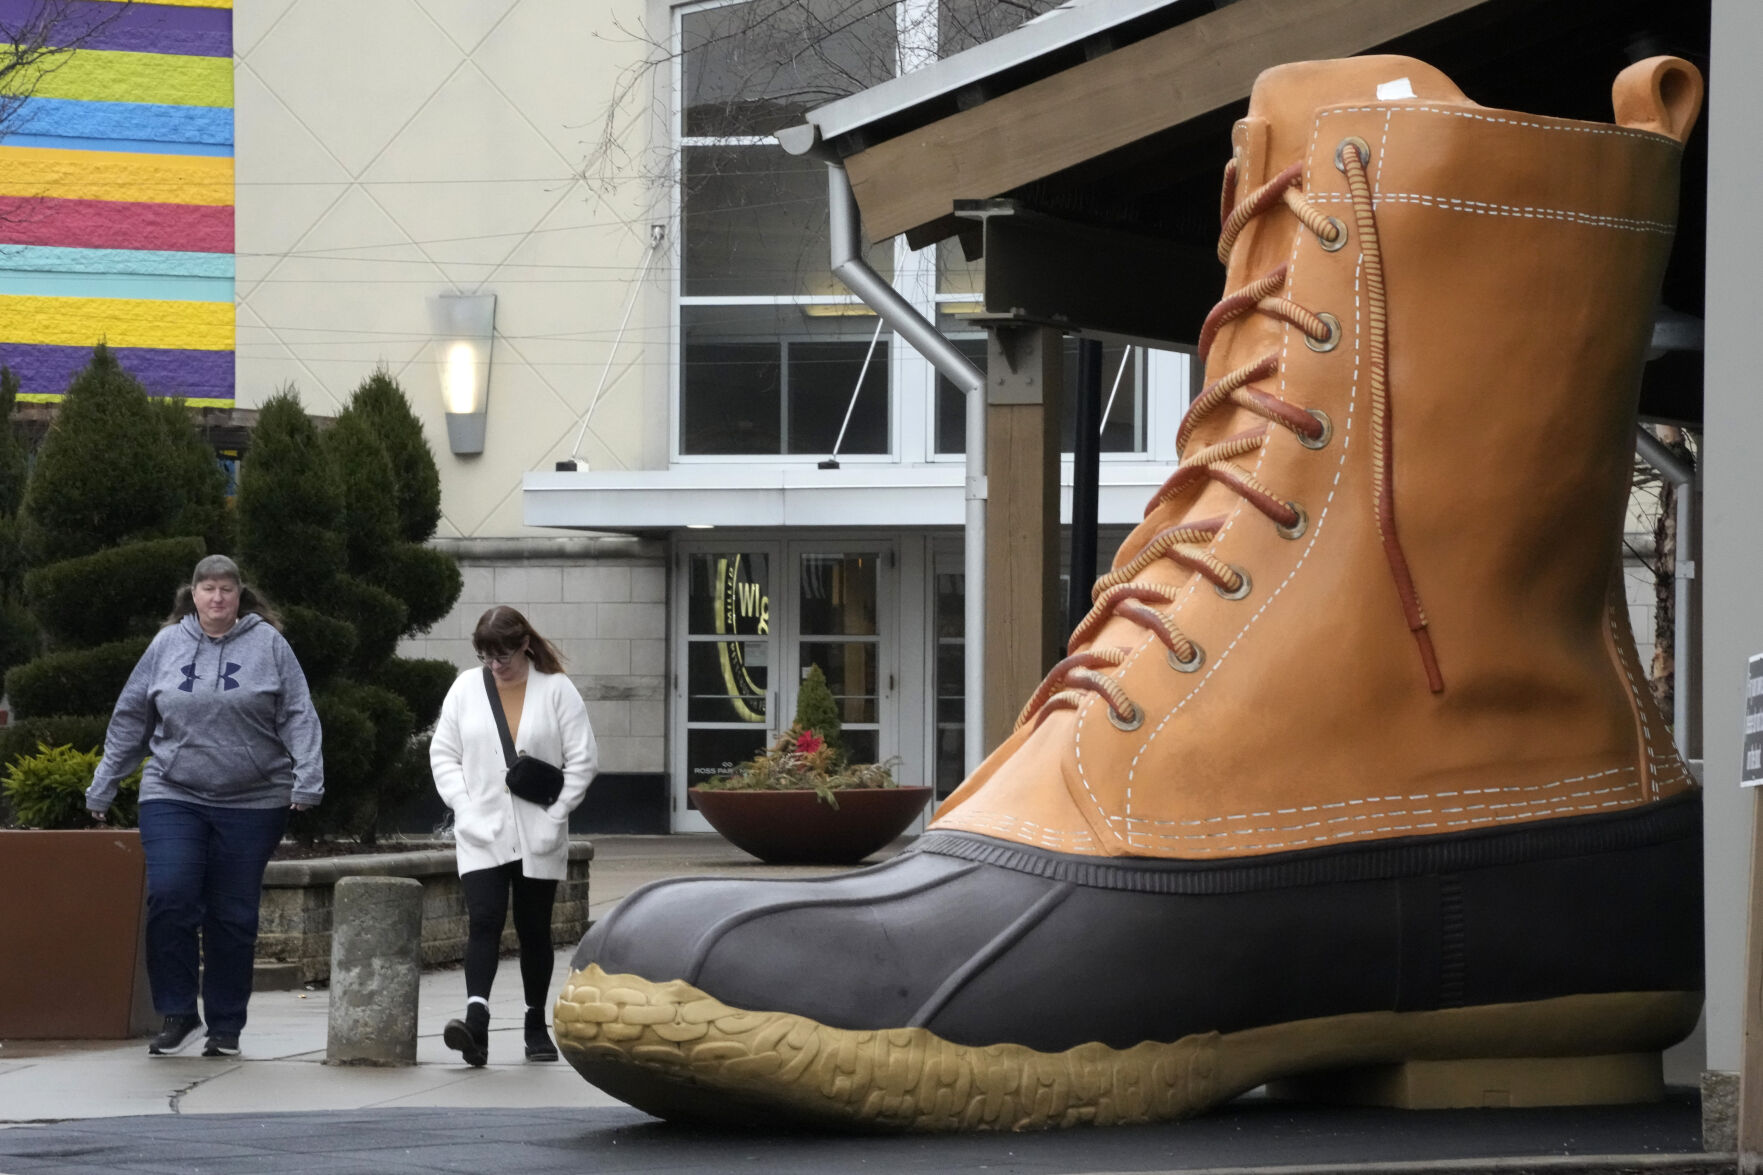 <p>Shoppers pass an large L.L. Bean boot displayed outside an L.L. Bean store in Pittsburgh on Monday, Jan. 30, 2023. On Wednesday, the Commerce Department releases U.S. retail sales data for January. (AP Photo/Gene J. Puskar)</p>   PHOTO CREDIT: Gene J. Puskar 